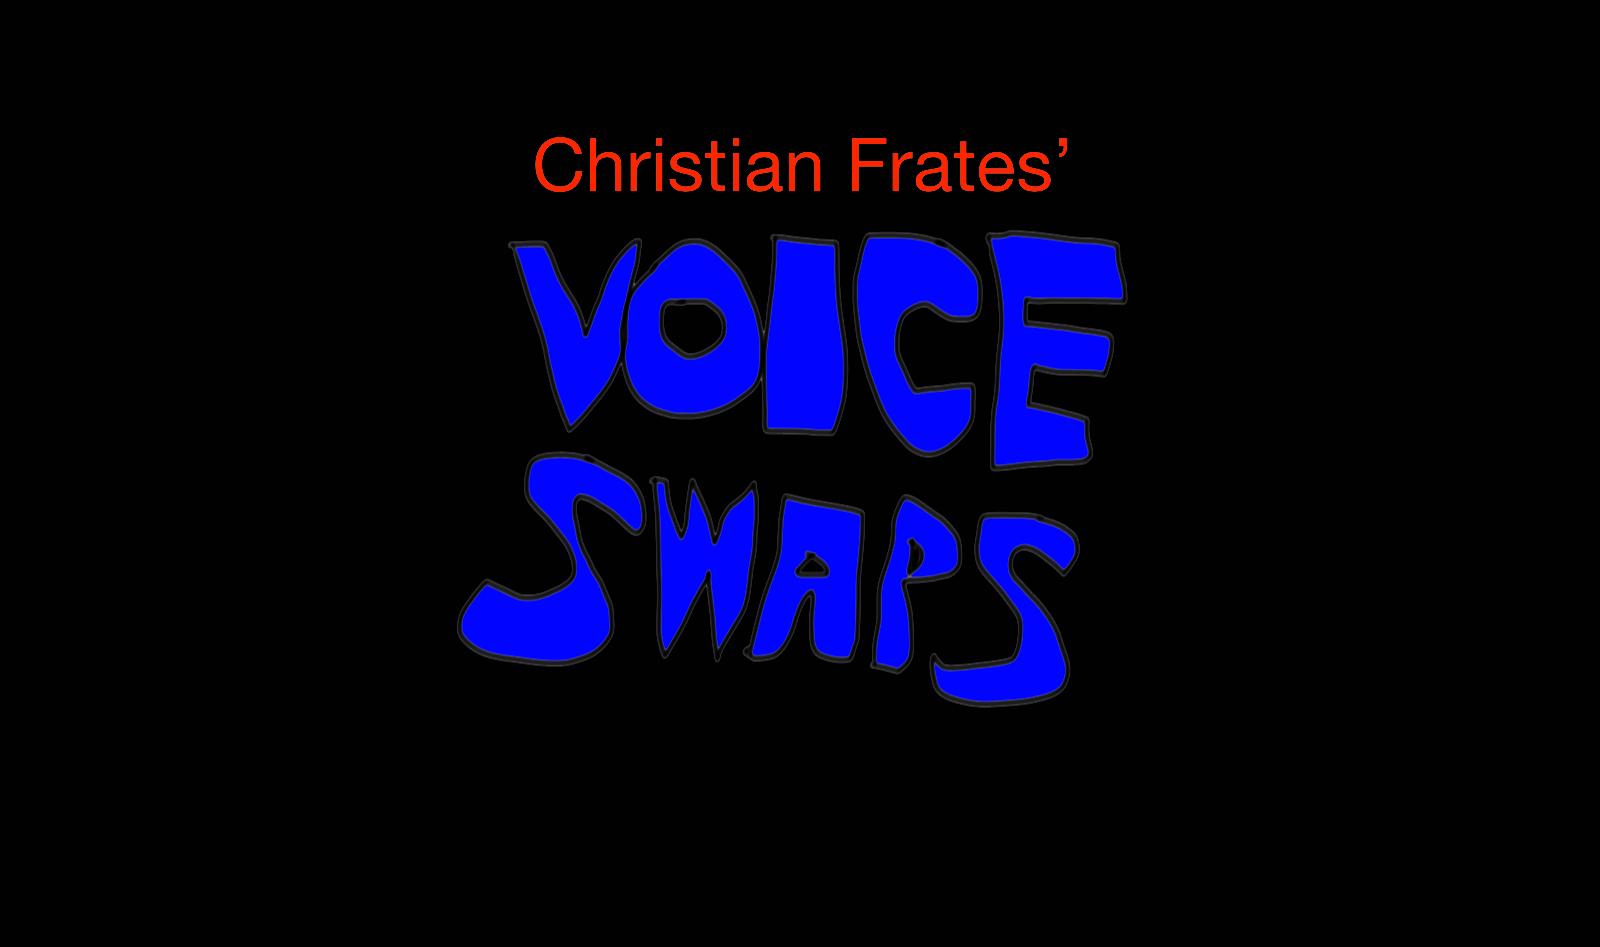 Christian Frates' Voice Swaps